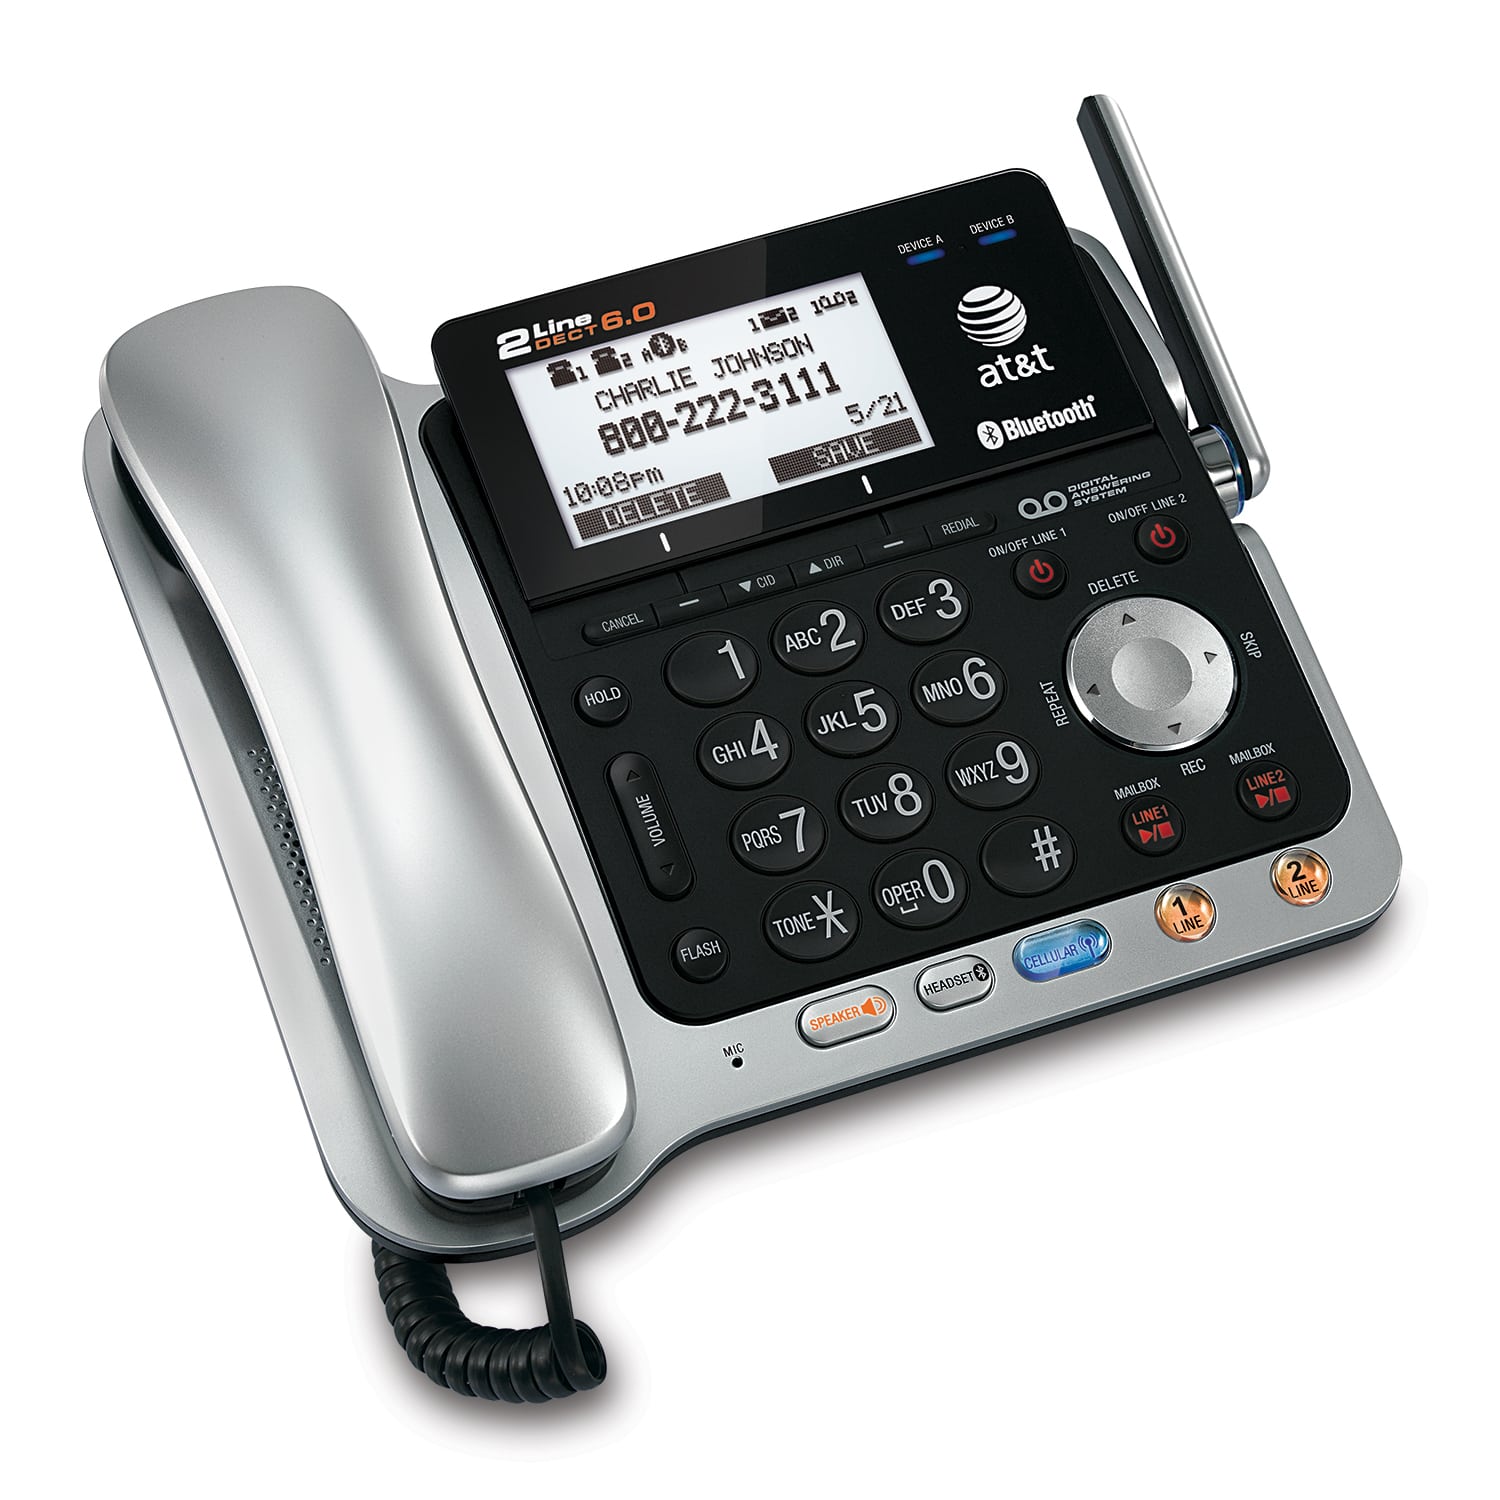 2-line 5 handset Connect to Cell™ corded/cordless answering system with caller ID/call waiting - view 3